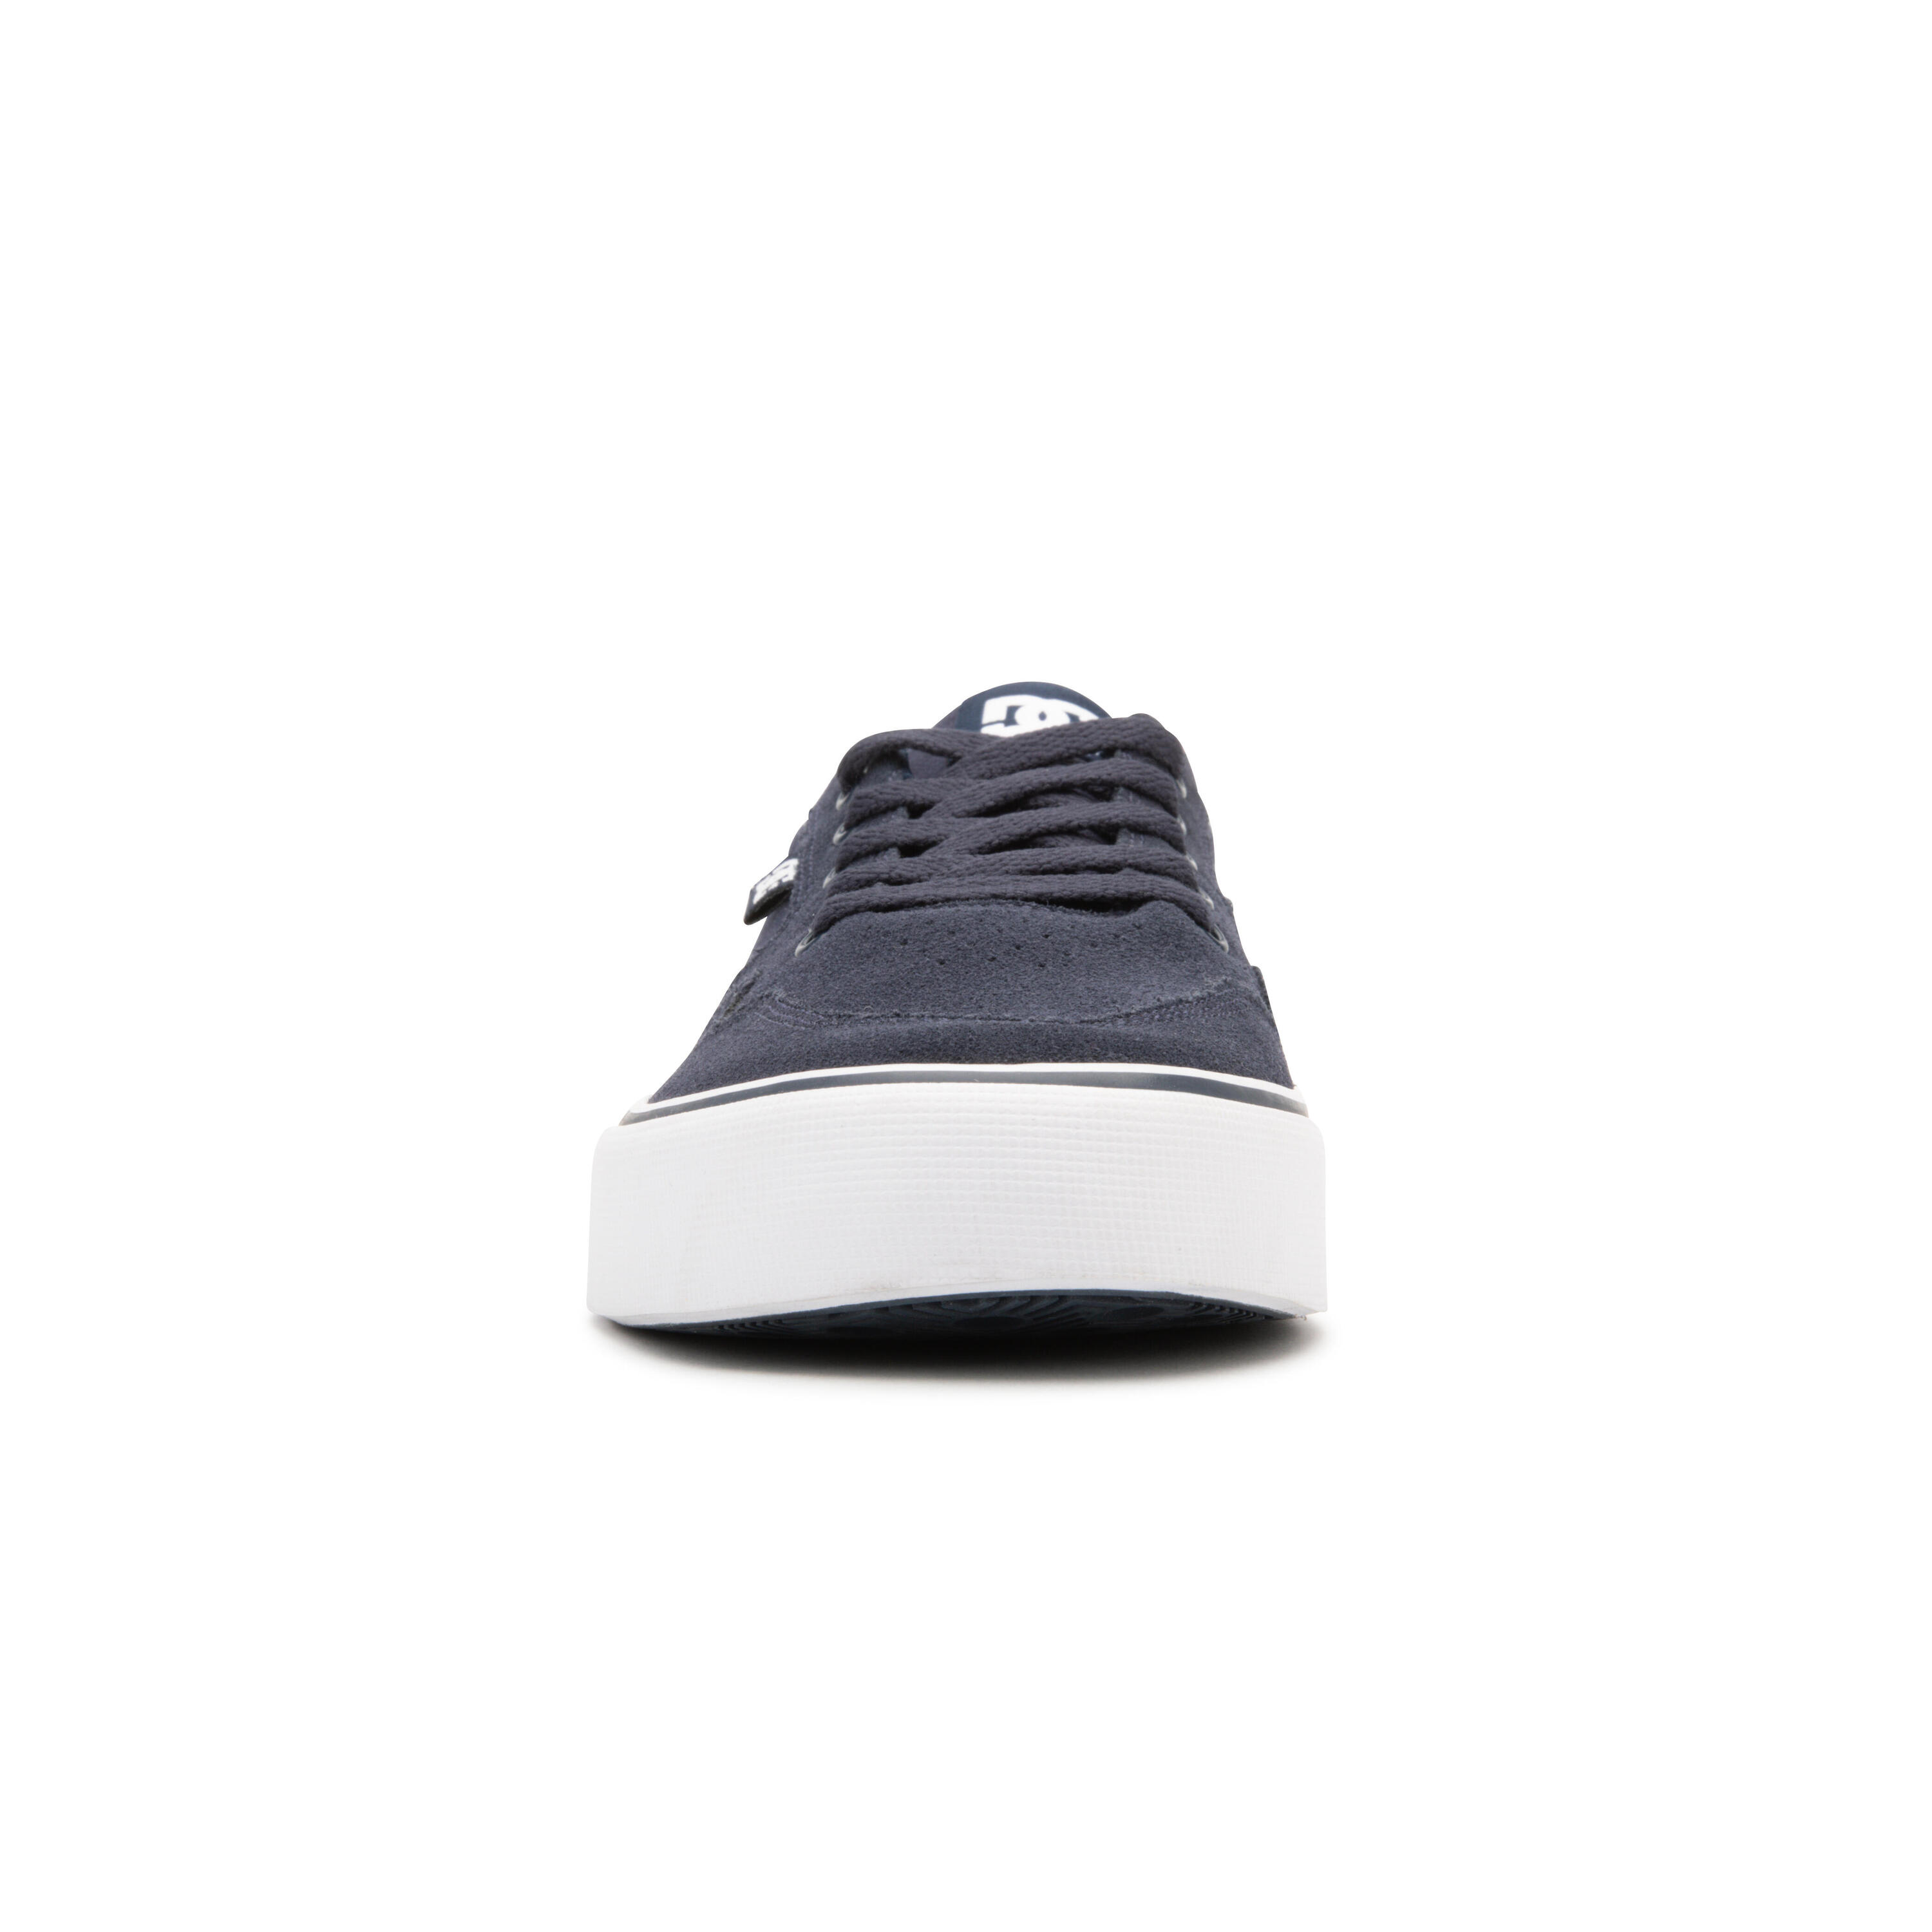 Adult Skate Shoes Rowlan - Blue 4/11